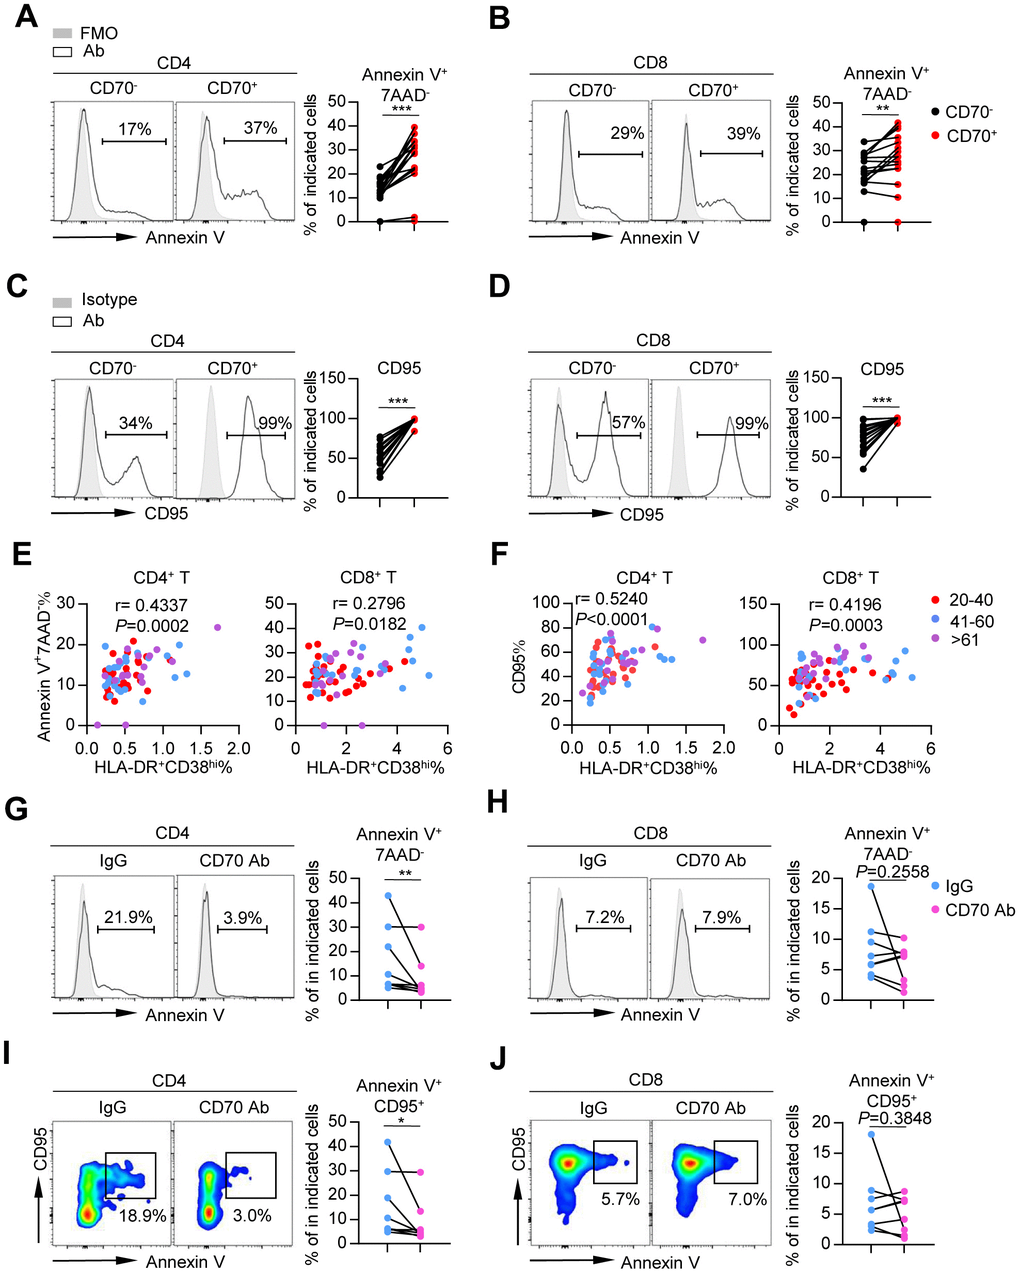 Aged CD70+ T cells exhibit high susceptibility to apoptosis that can be reversed by blocking CD70. (A–D) Percentage of apoptotic cells (Annexin V+ 7AAD-) (A–B) and expression of CD95 (C–D) in CD70- and CD70+ T cells from elderly individuals (61-80 years, n = 17). Representative histograms (left) and plots (right) of the percentage of apoptotic cells are shown. The p-values were obtained by paired t-test (Annexin V) or Wilcoxon matched-pairs signed rank test (CD95). (E–F) Correlation analysis of percentage of HLA-DR+CD38hi cells and percentage of Annexin V+ 7AAD- cells (E) or CD95 expression (F) on CD4+ T cells (left) and CD8+ T cells (right) from all healthy donors. Spearman’s non-parametric test was used for correlation analysis. (G–J) Purified CD4+ and CD8+ T cells from elderly individuals (n = 8) were cultured in vitro with anti-human CD70 antibody or isotype IgG at a concentration of 10 μg/mL. After culturing for 24 h, the susceptibility to apoptosis was evaluated by flow cytometry. Representative histogram (left) and plot (right) of percentage of Annexin V+ 7AAD- (G–H) and Annexin V+ CD95+ cells (I–J) in CD4+ and CD8+ T cells. The p-values were obtained by paired t-test (Annexin V+ 7AAD- [CD8+ T cells], Annexin V+ CD95+ [CD8+ T cells]) or Wilcoxon matched-pairs signed rank test (Annexin V+ 7AAD- [CD4+ T cells], Annexin V+ CD95+ [CD4+ T cells]). *p p p 